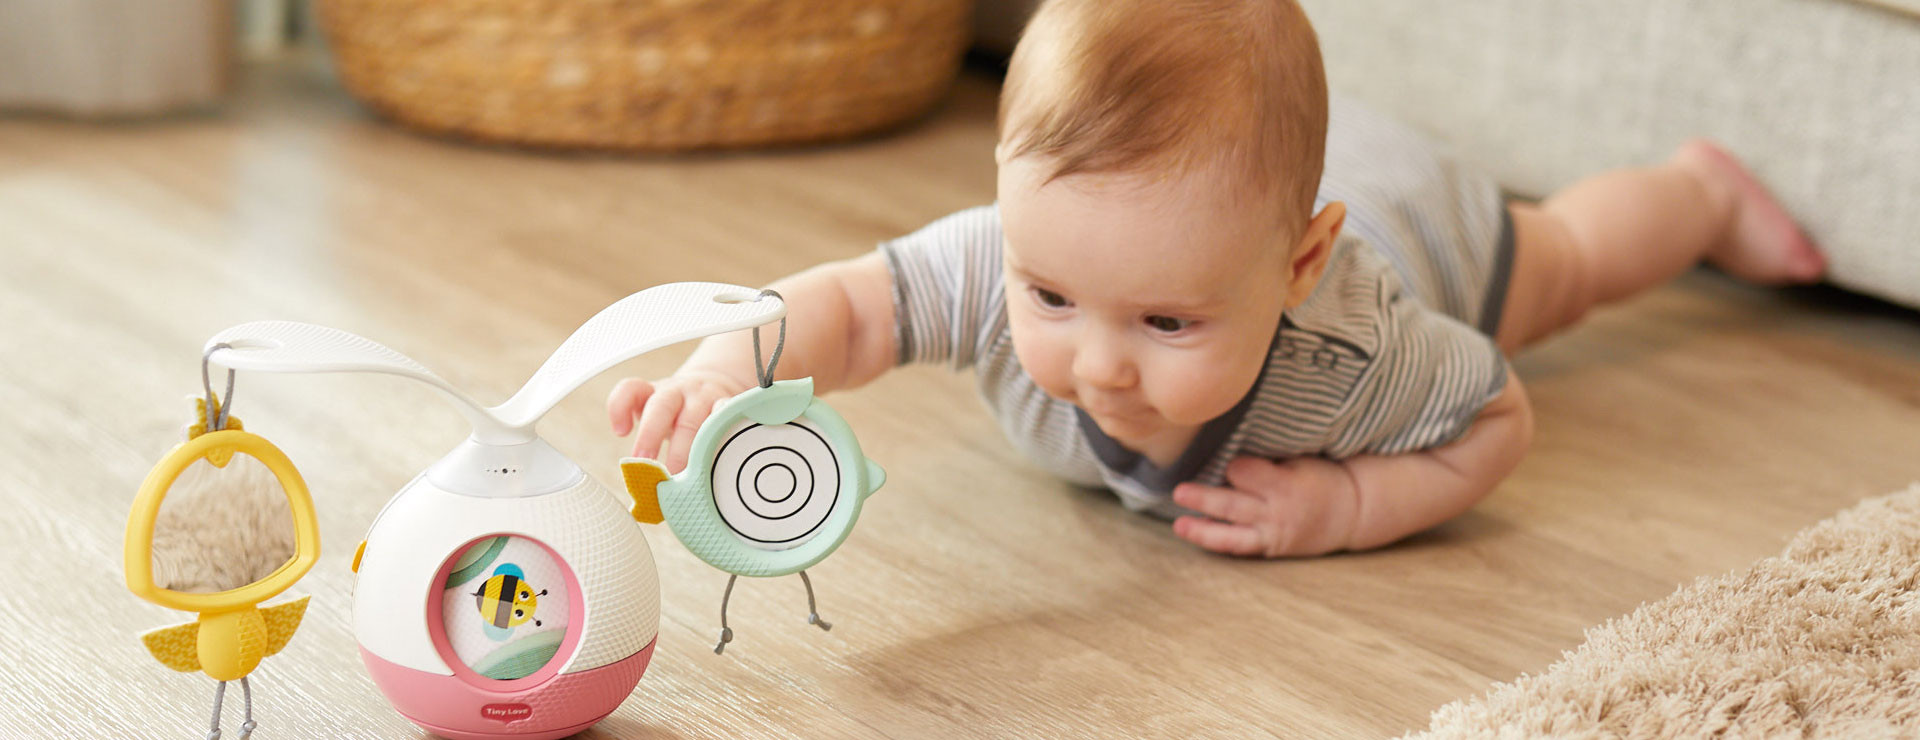 Double-sided mirror & hologram toys attract baby's attention